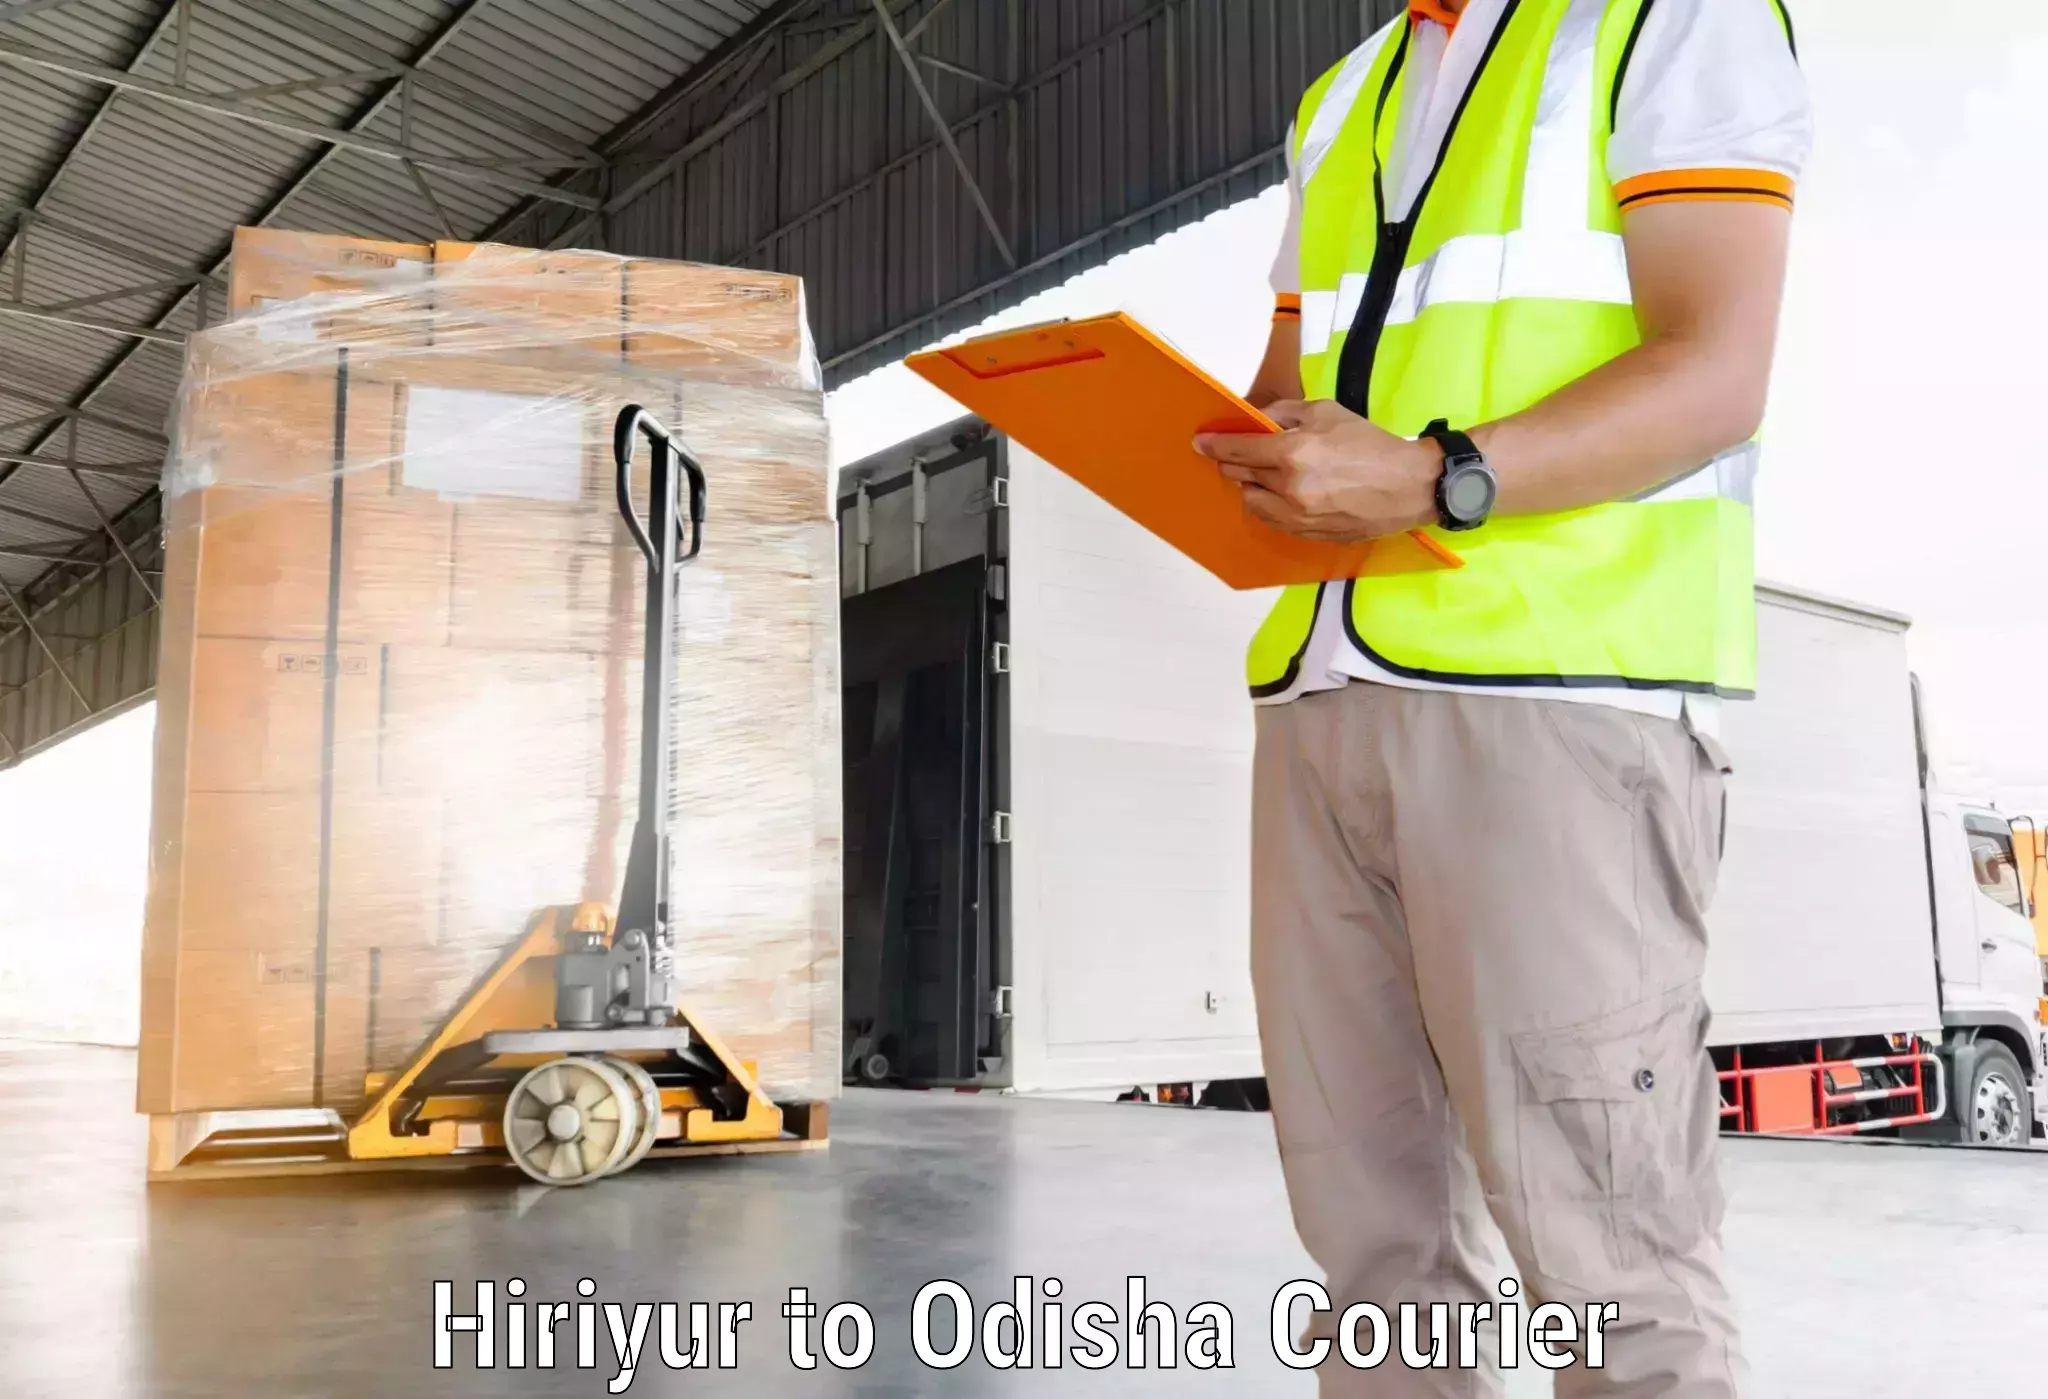 Business delivery service in Hiriyur to Phulbani